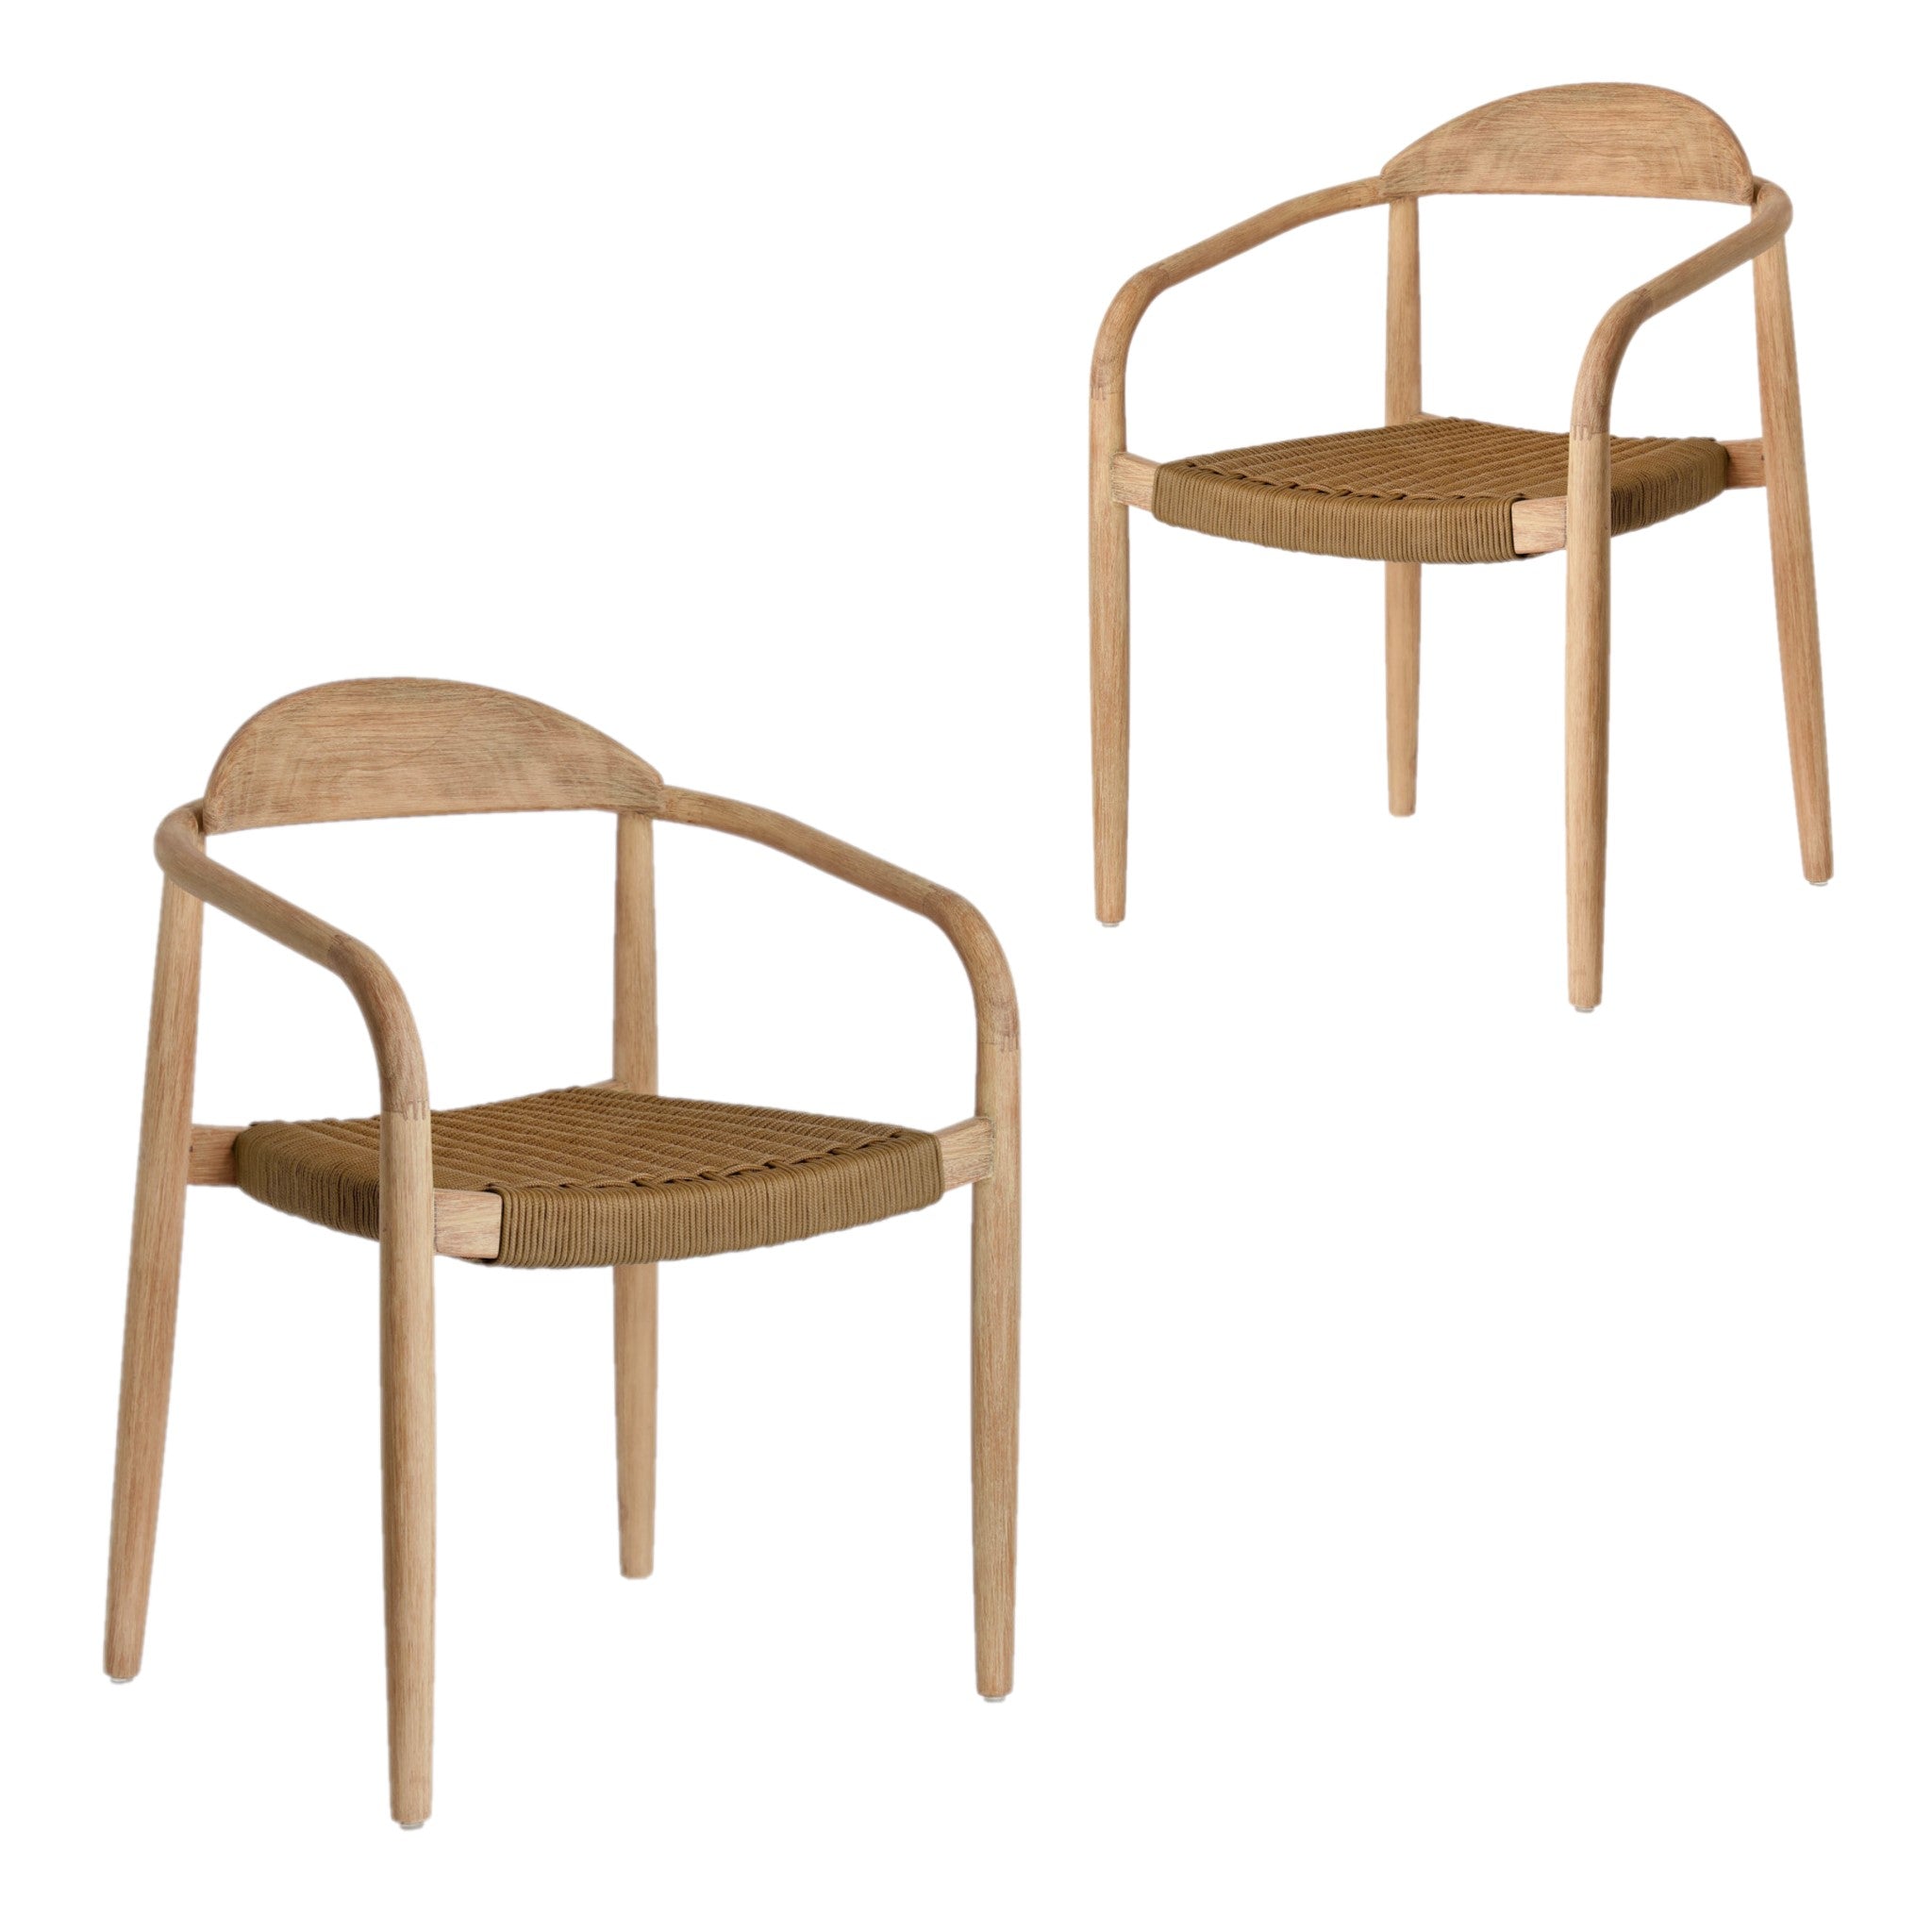 Set of 2 - Glynis Eucalyptus Timber Dining Chair - Beige